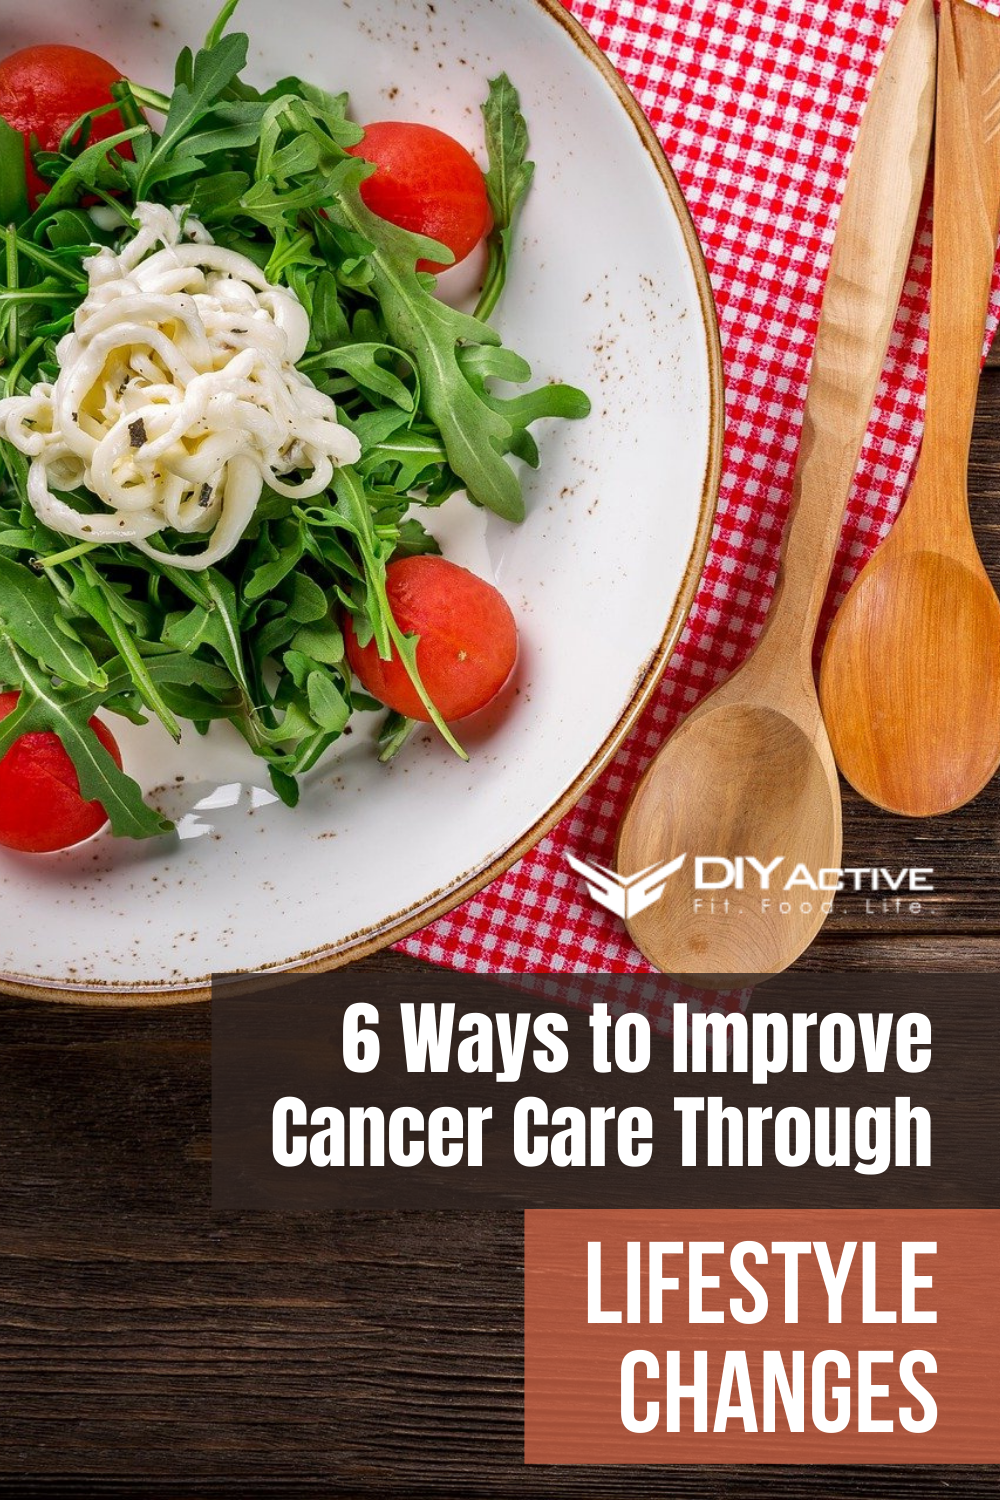 6 Ways to Improve Cancer Care Through Lifestyle Changes